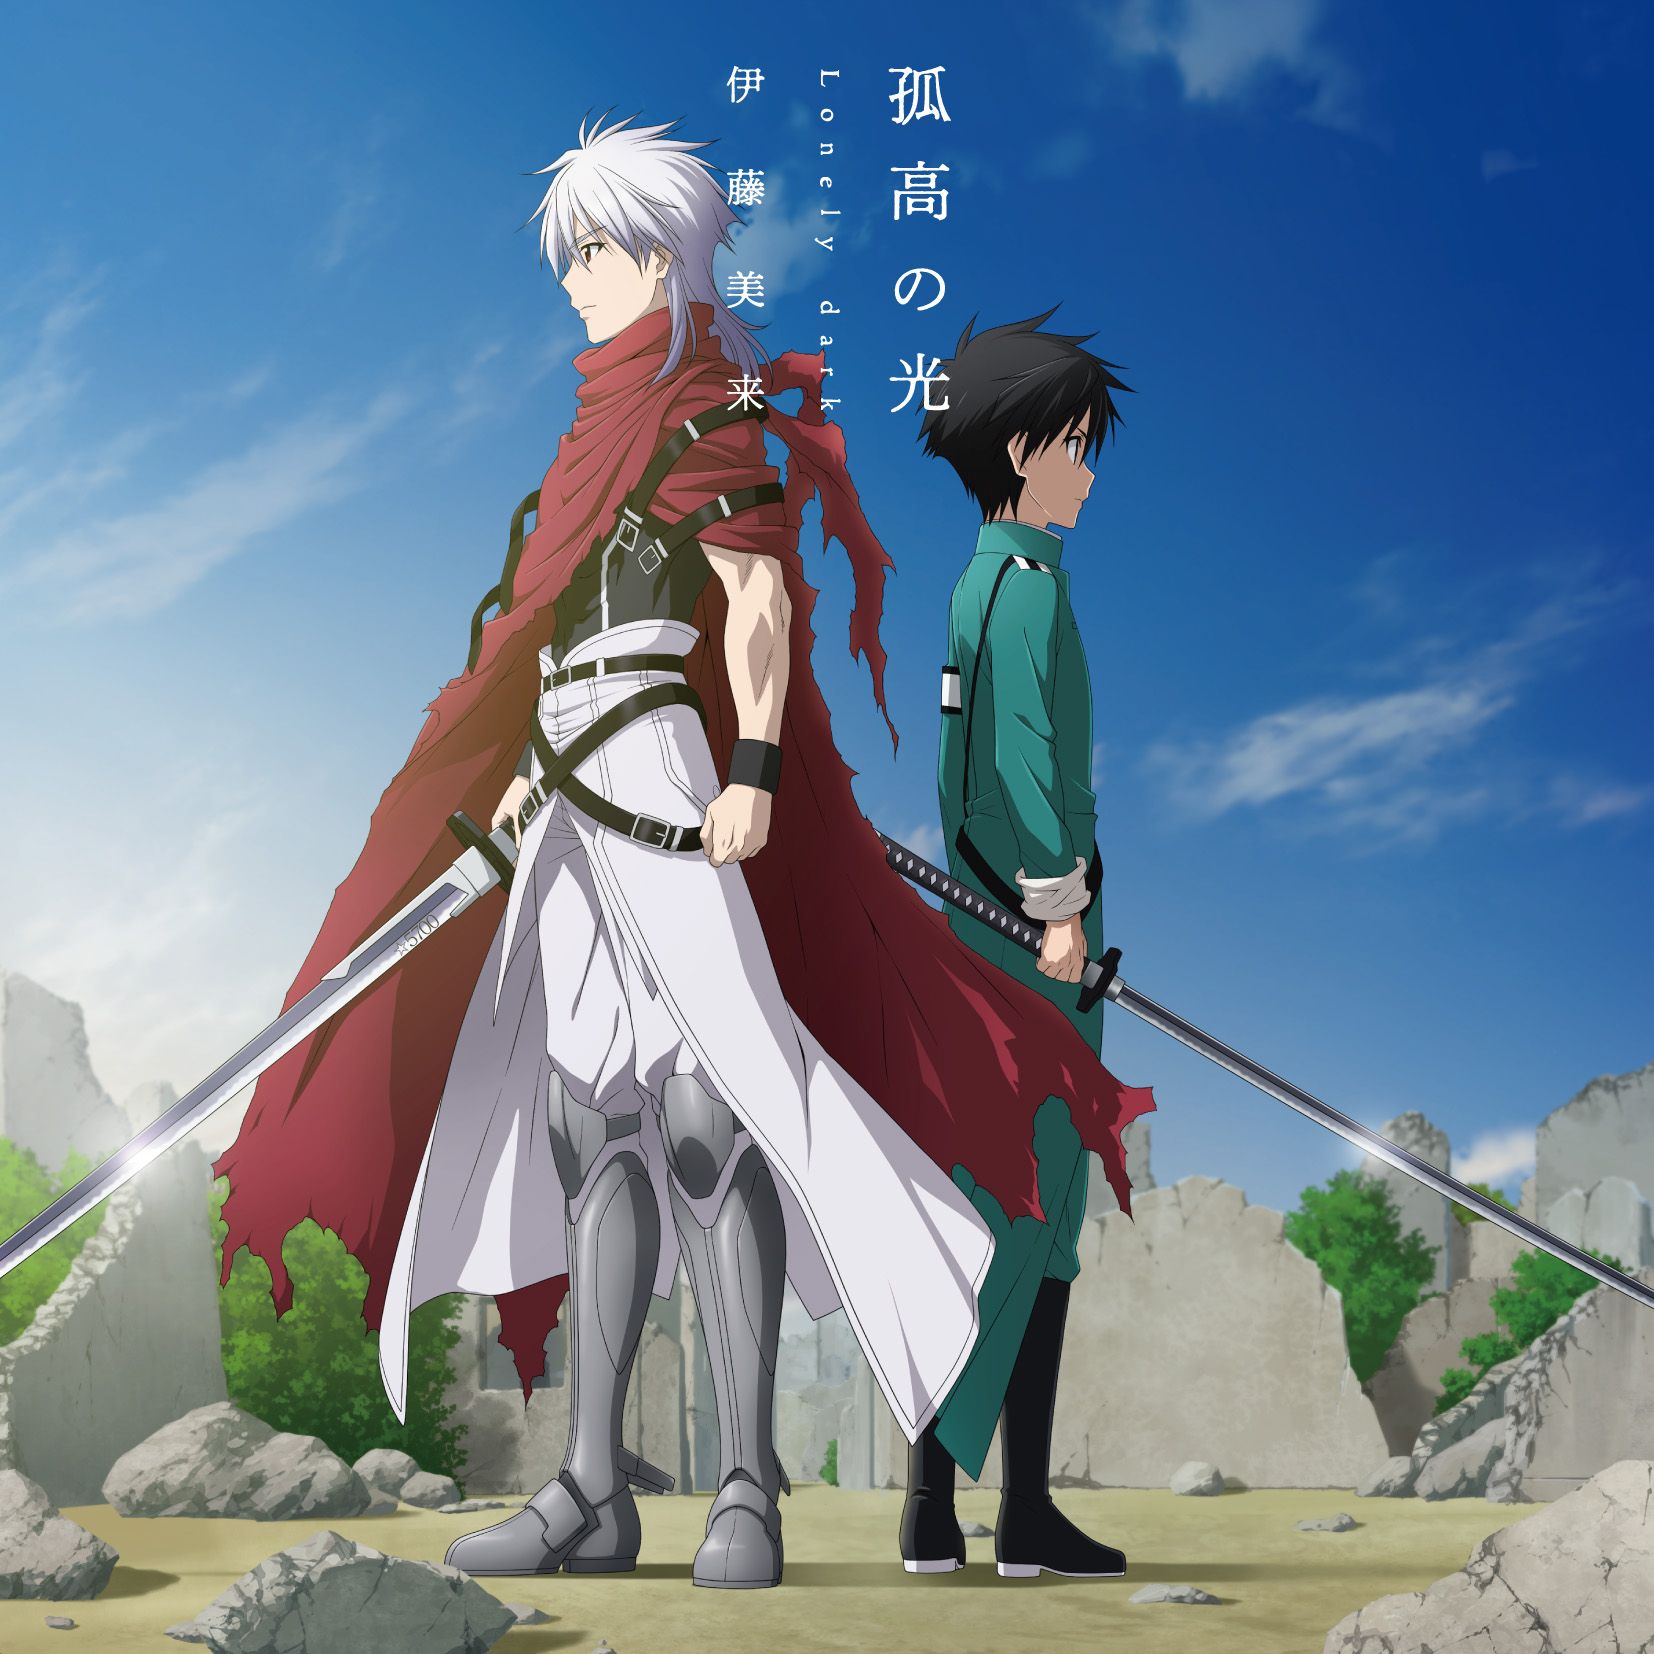 Plunderer anime wallpaper APK for Android Download